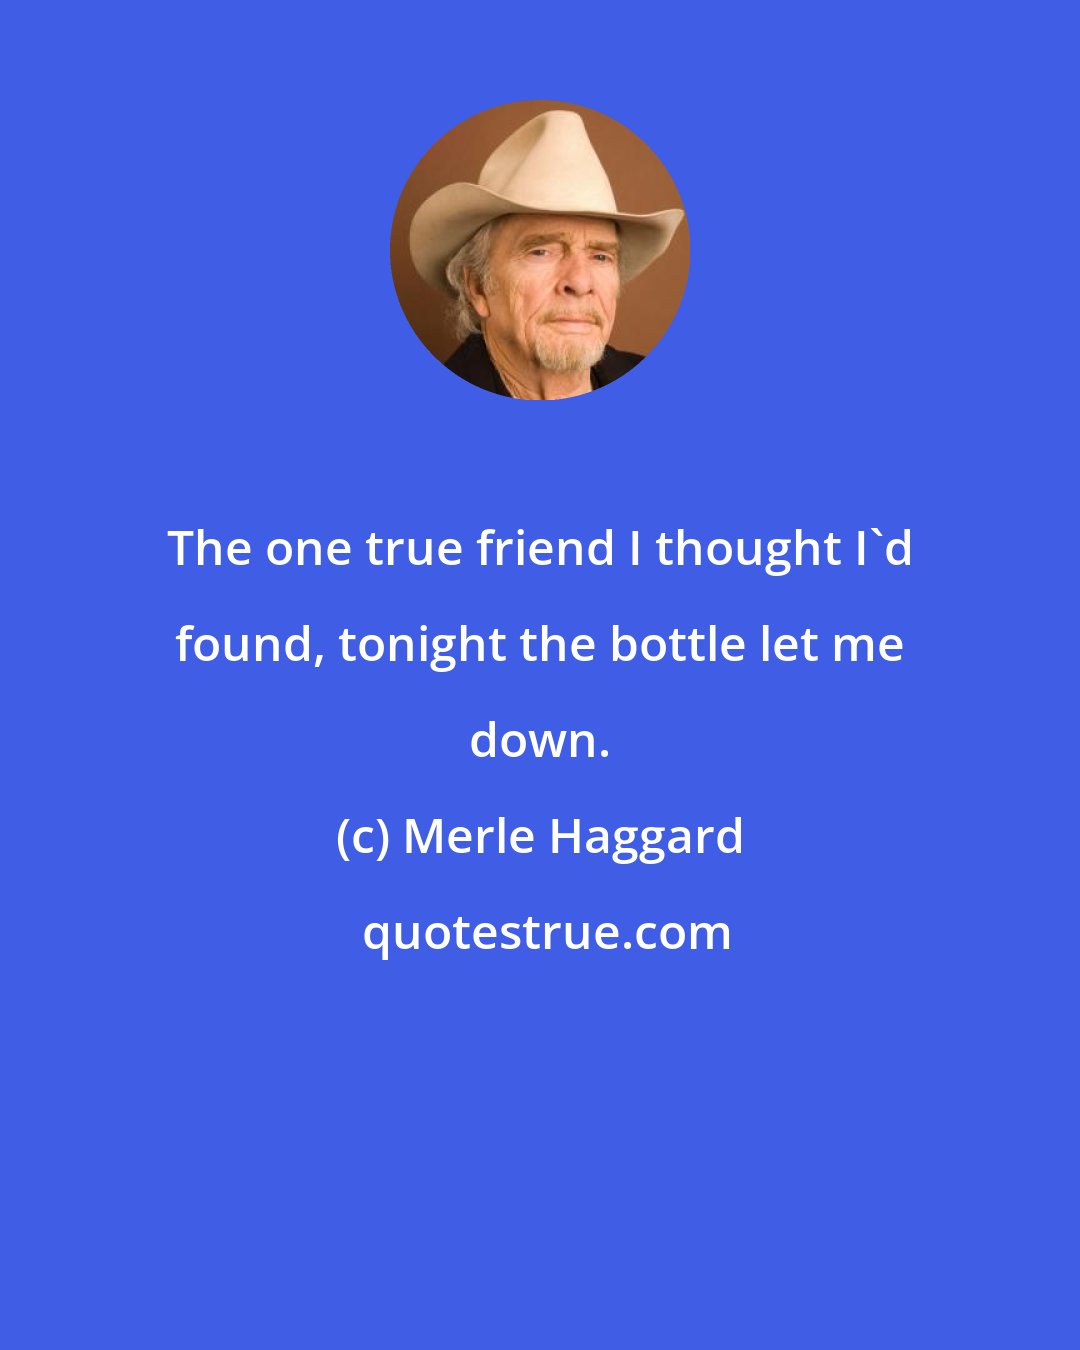 Merle Haggard: The one true friend I thought I'd found, tonight the bottle let me down.